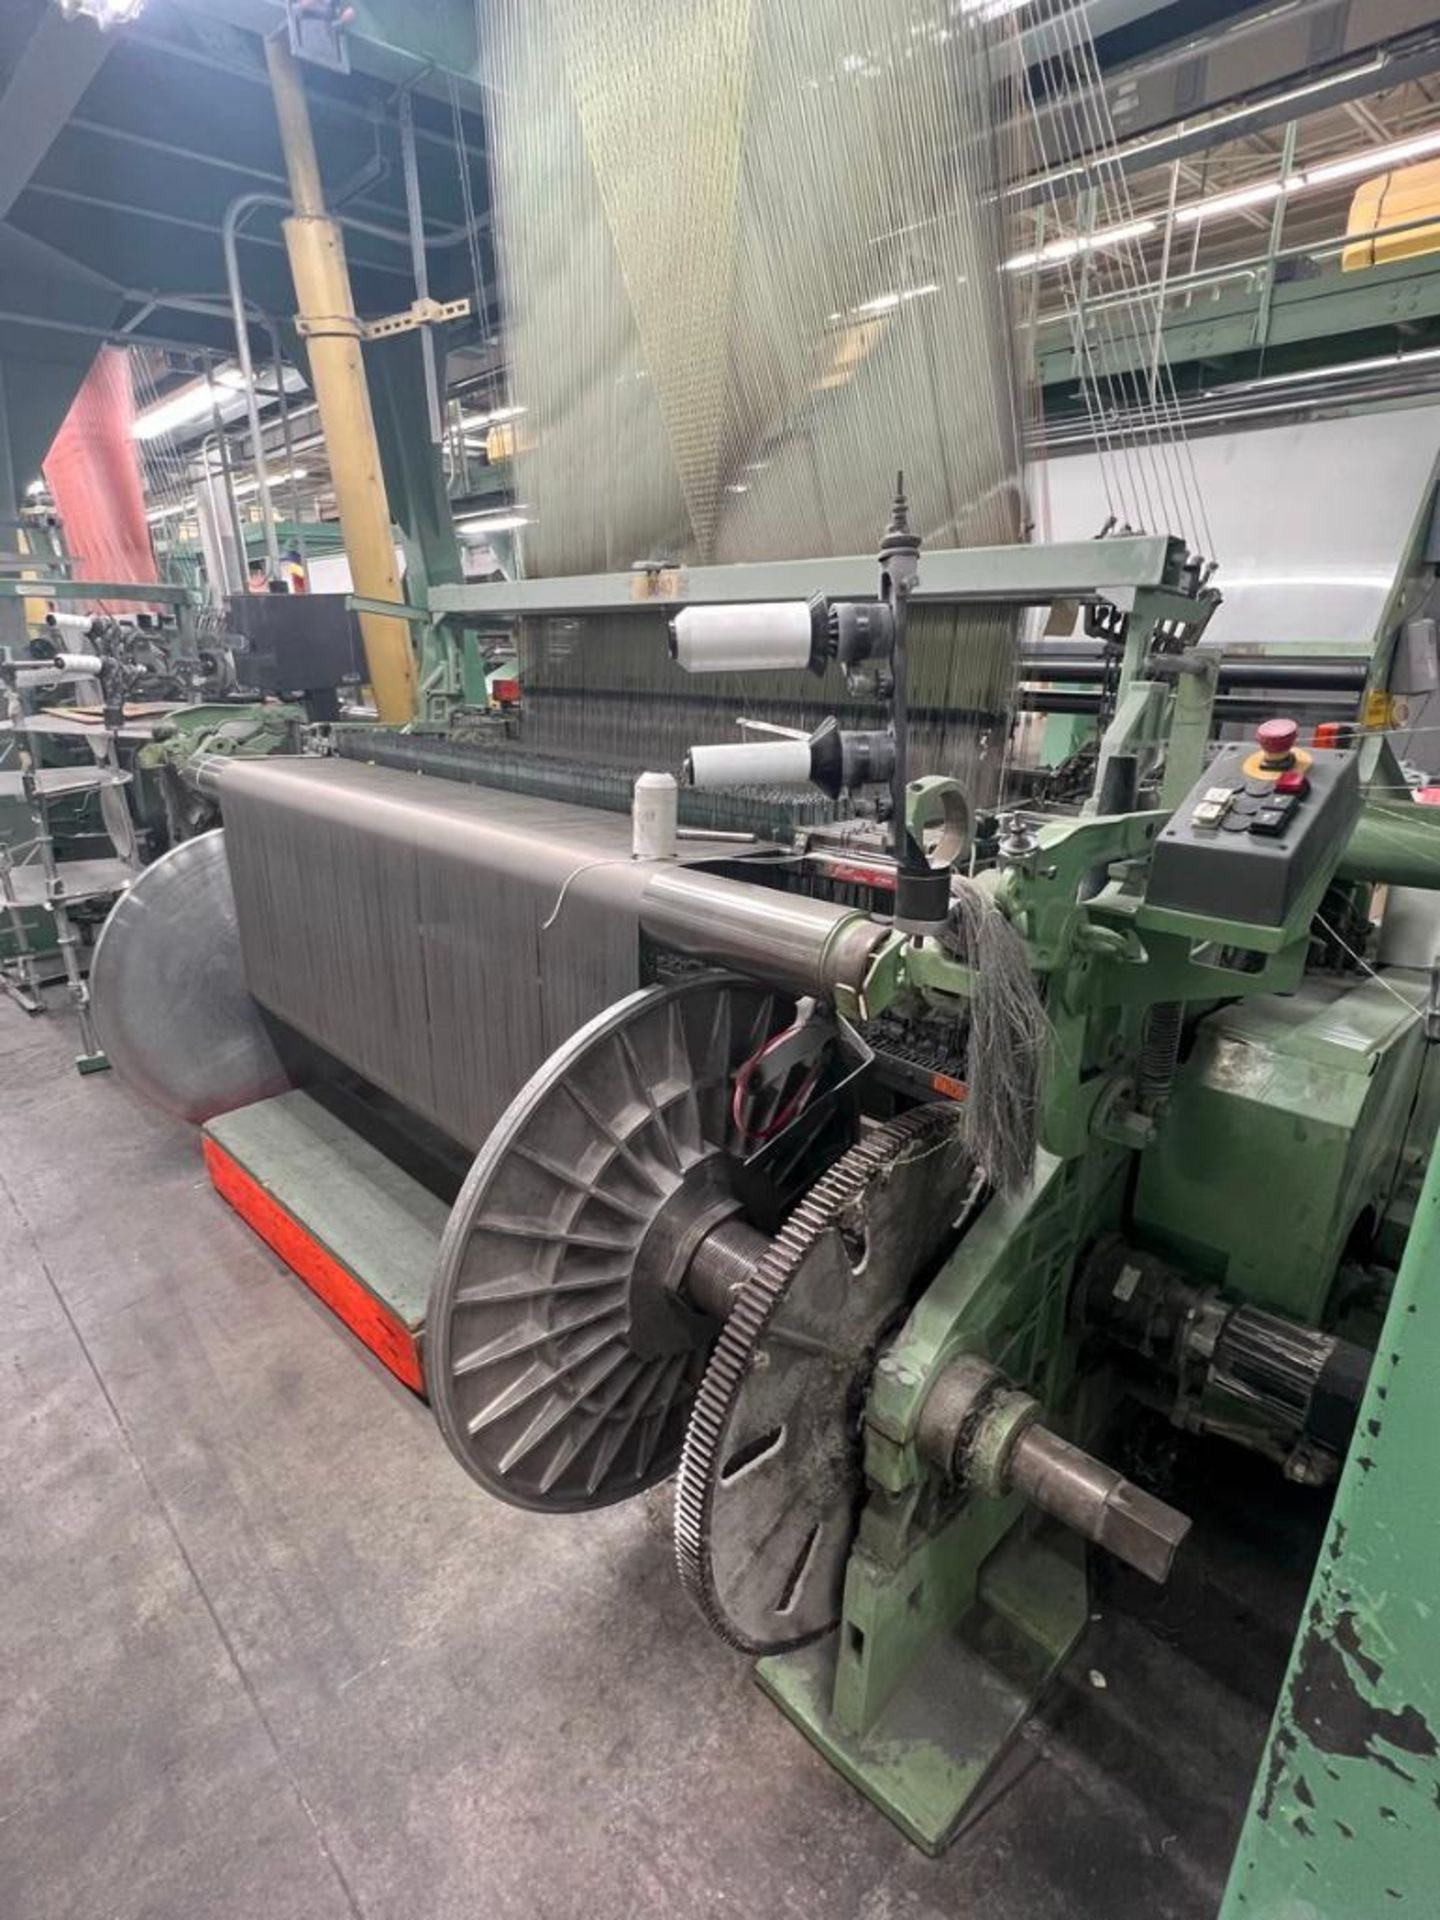 1997 Dornier 210 cm Jacquard Rapier Loom, Model HTVS 8/J, S/N 38460 - Equipped with 8 Colors, 4 Feed - Image 4 of 14